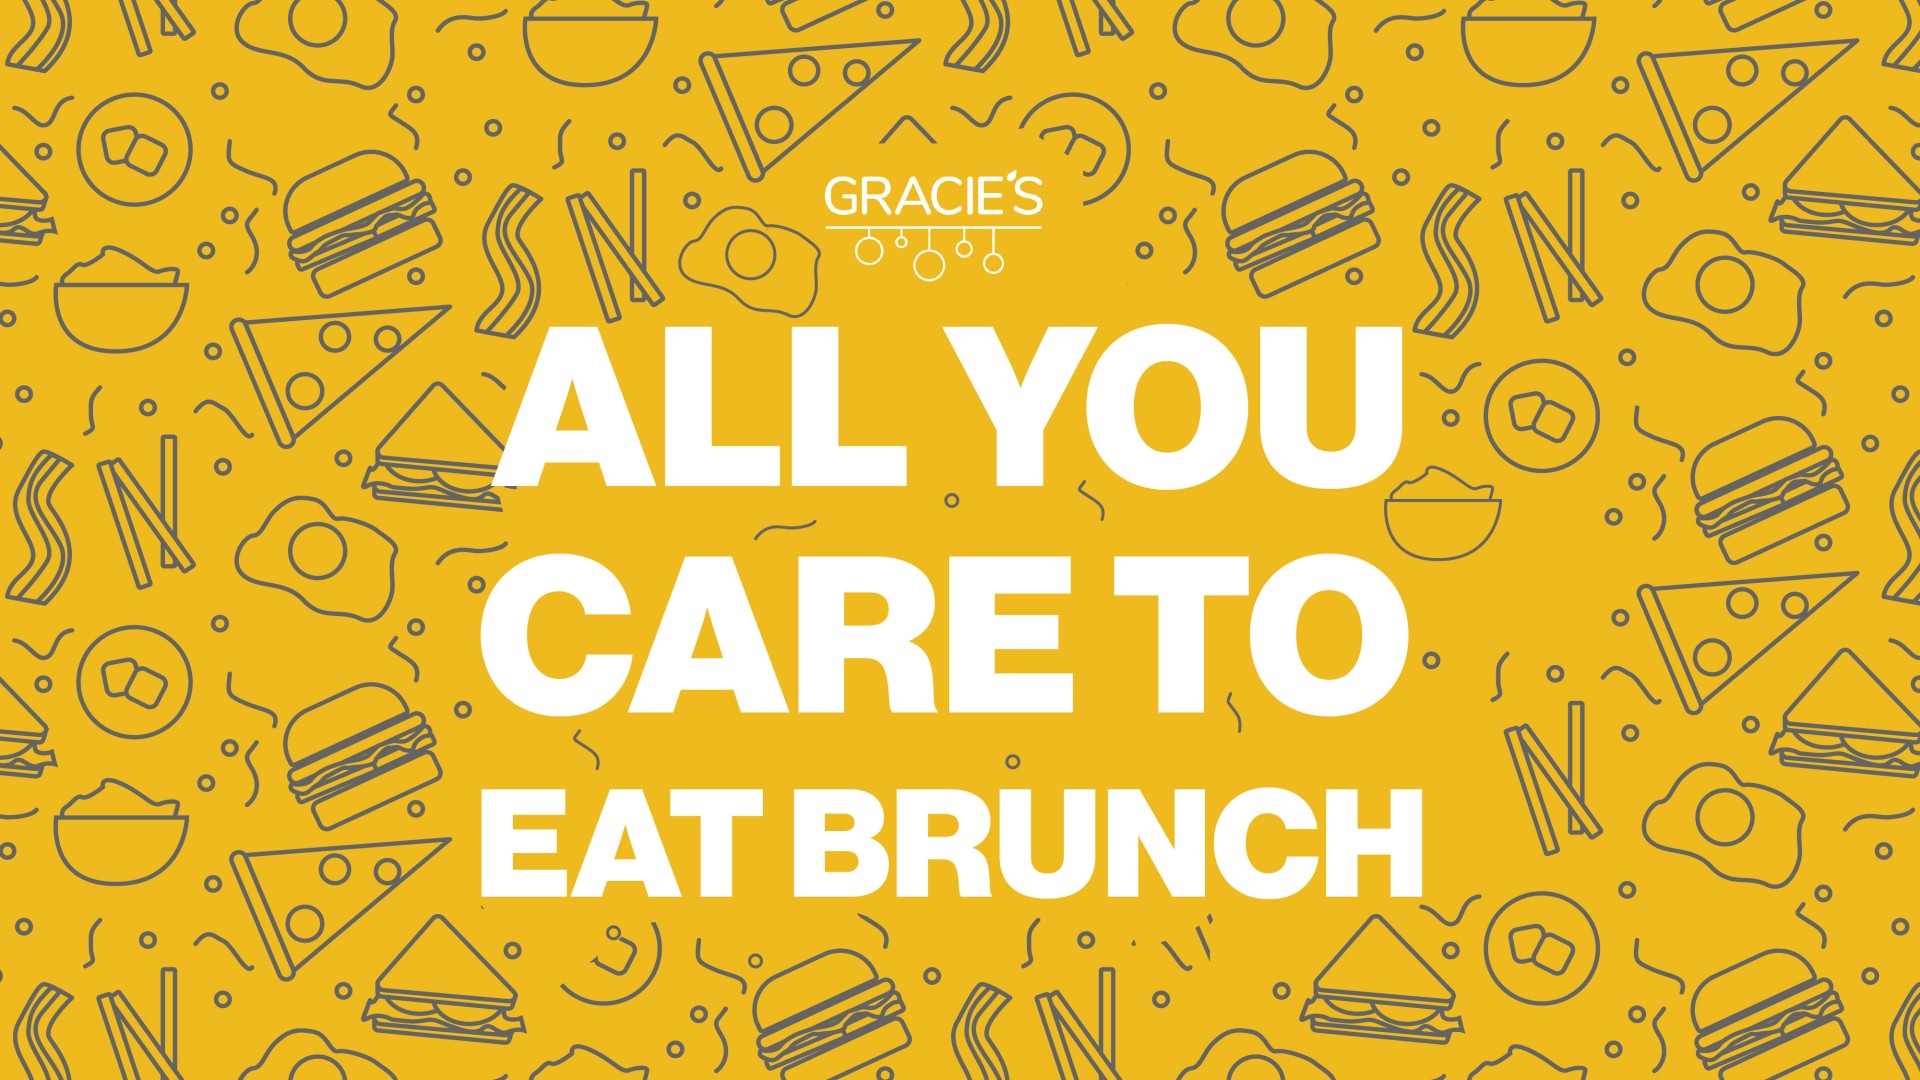 Gracie's All You Care To Eat Brunch